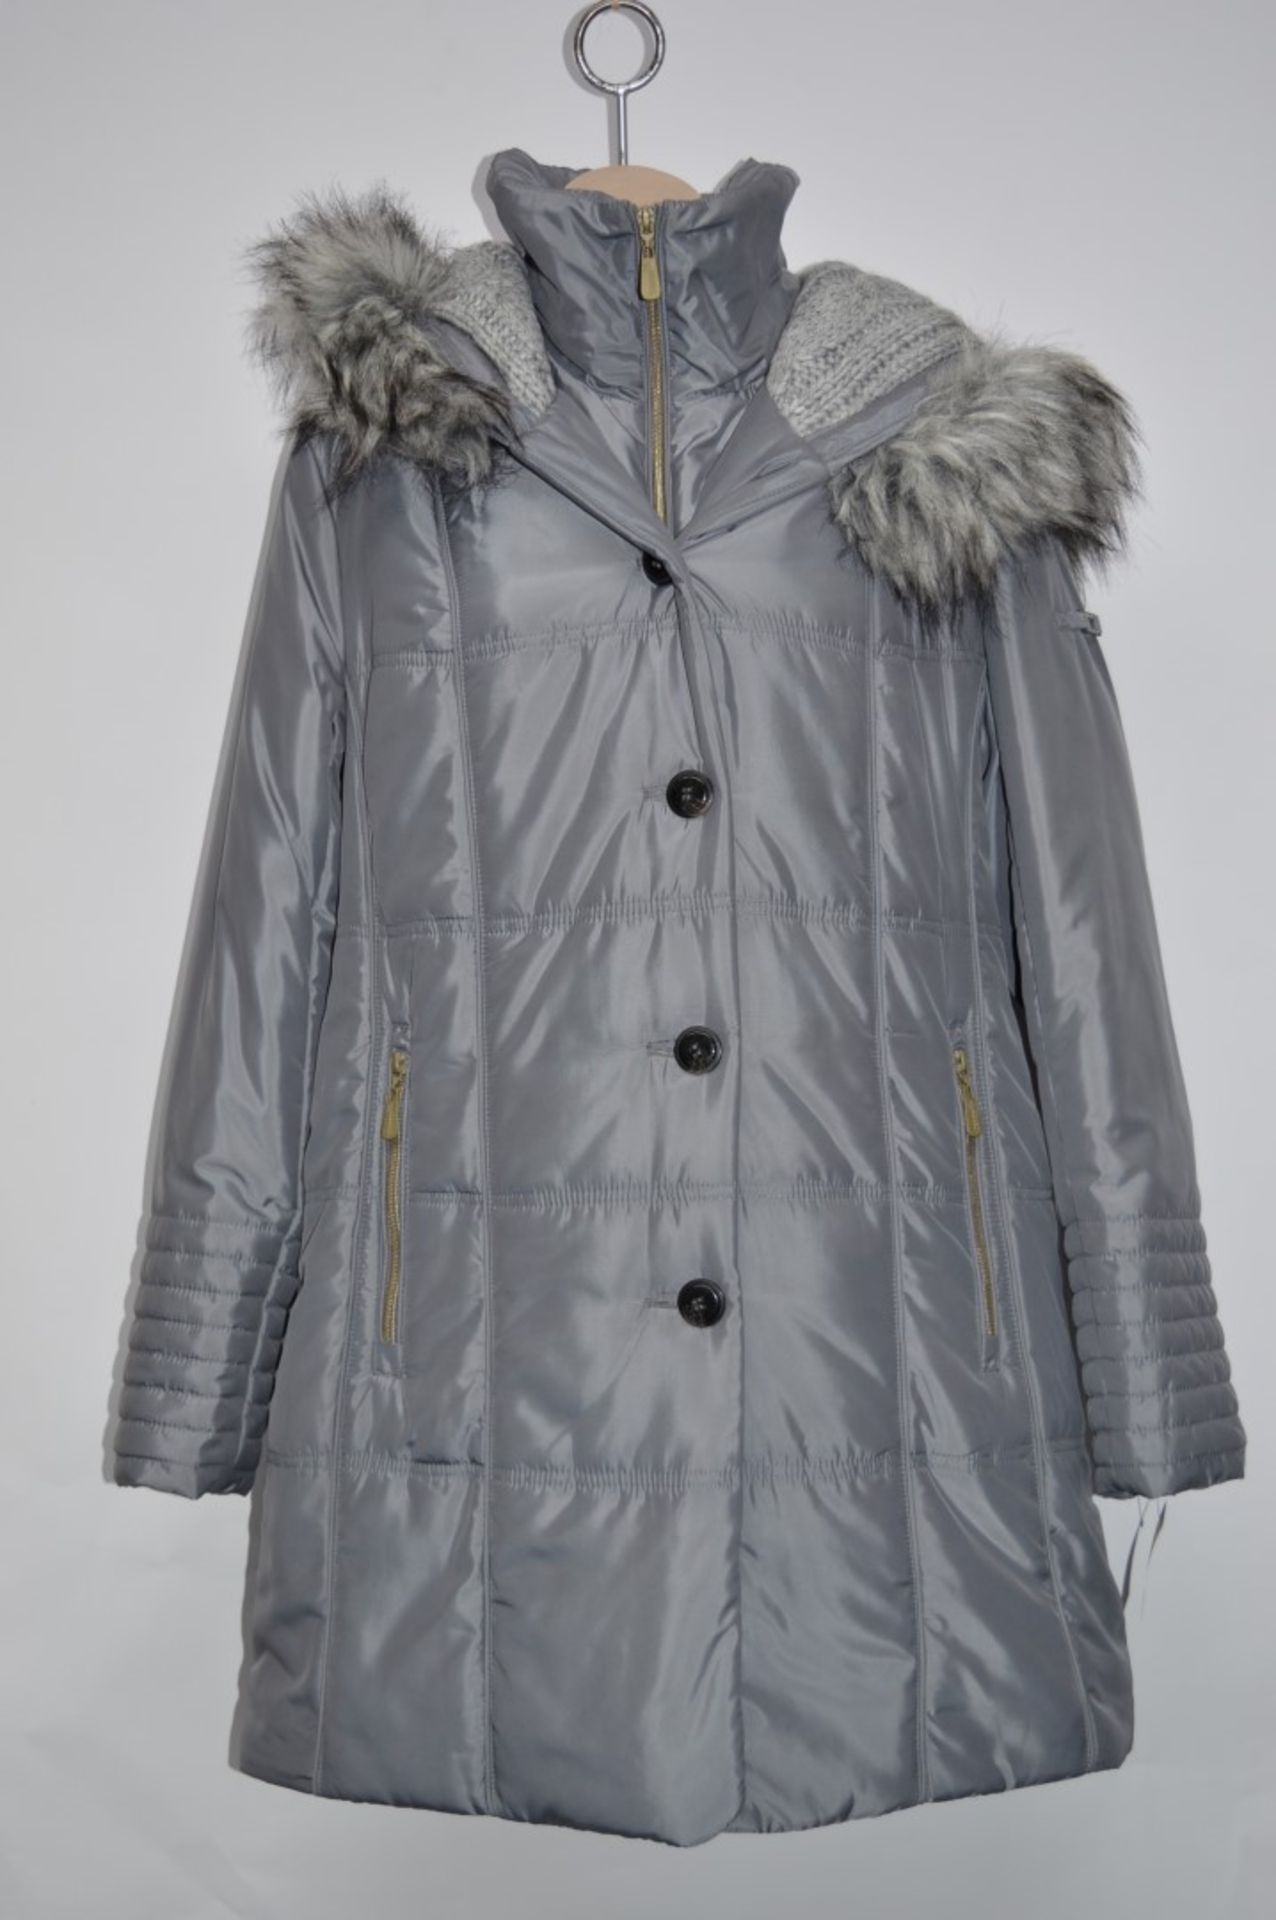 1 x Steilmann Kirsten Cover Womens Coat - Real Down Feather Filled Coat With Functional Pockets, - Image 5 of 13